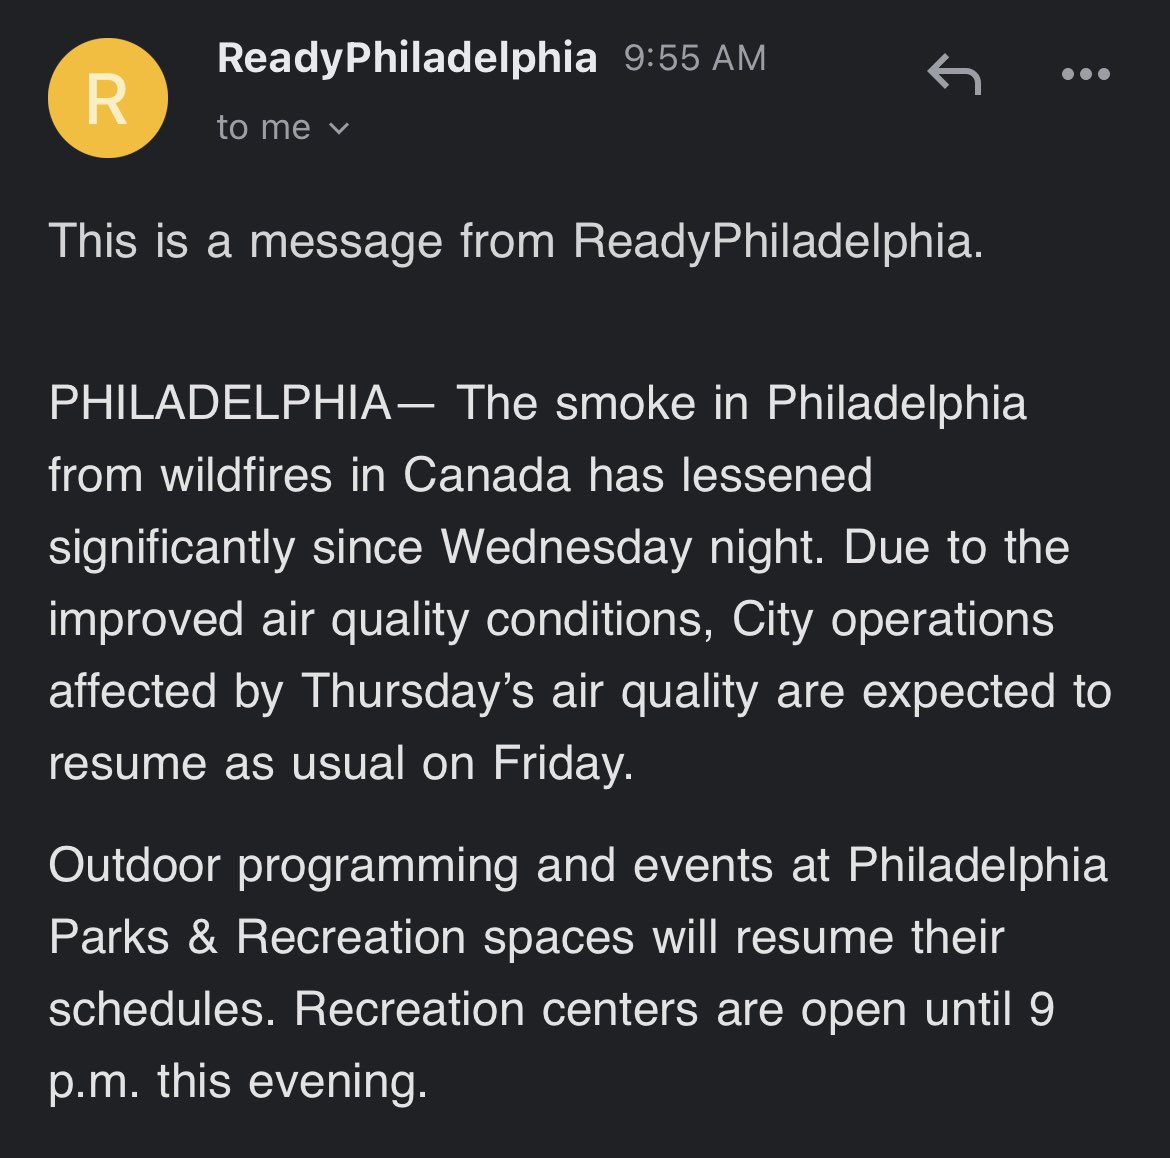 This “shift to virtual” is a joke #phled. Note the city of Phila communication which states that air quality has improved, and outdoor programming will resume today. 

Yet @PHLschools shifts to virtual. 

Please examine your data sources bc they are clearly not right.